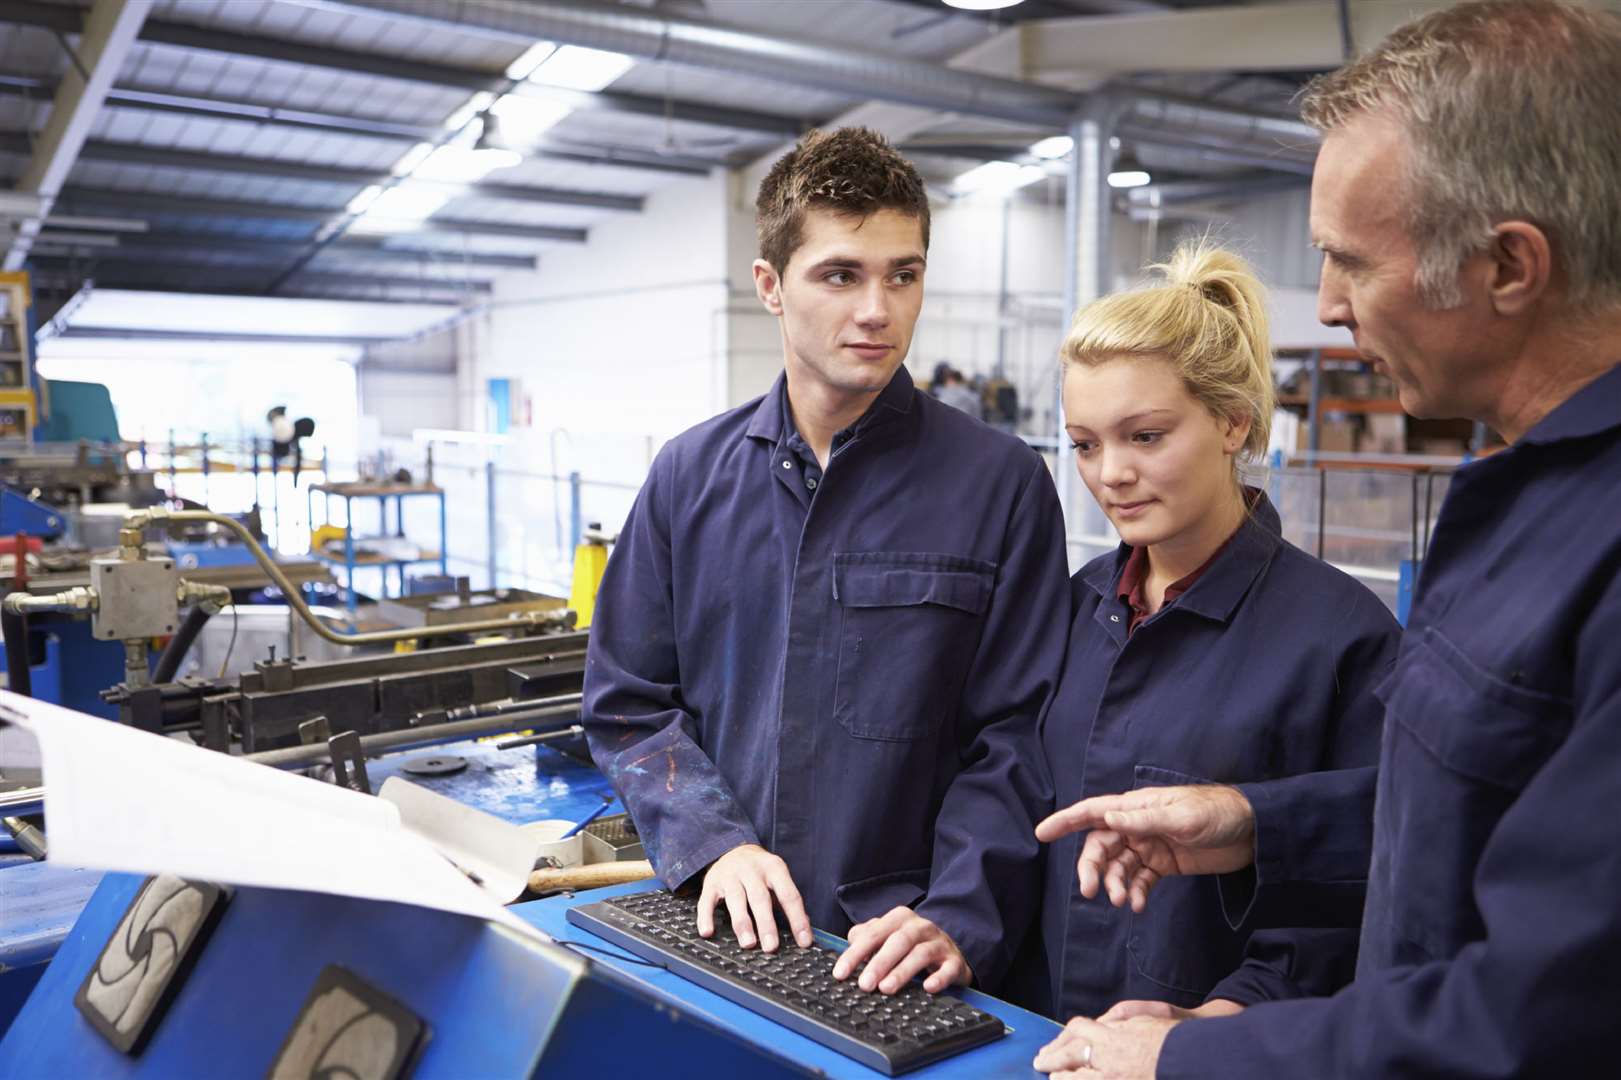 Apprentices completing their course in Kent or Medway can apply to take part